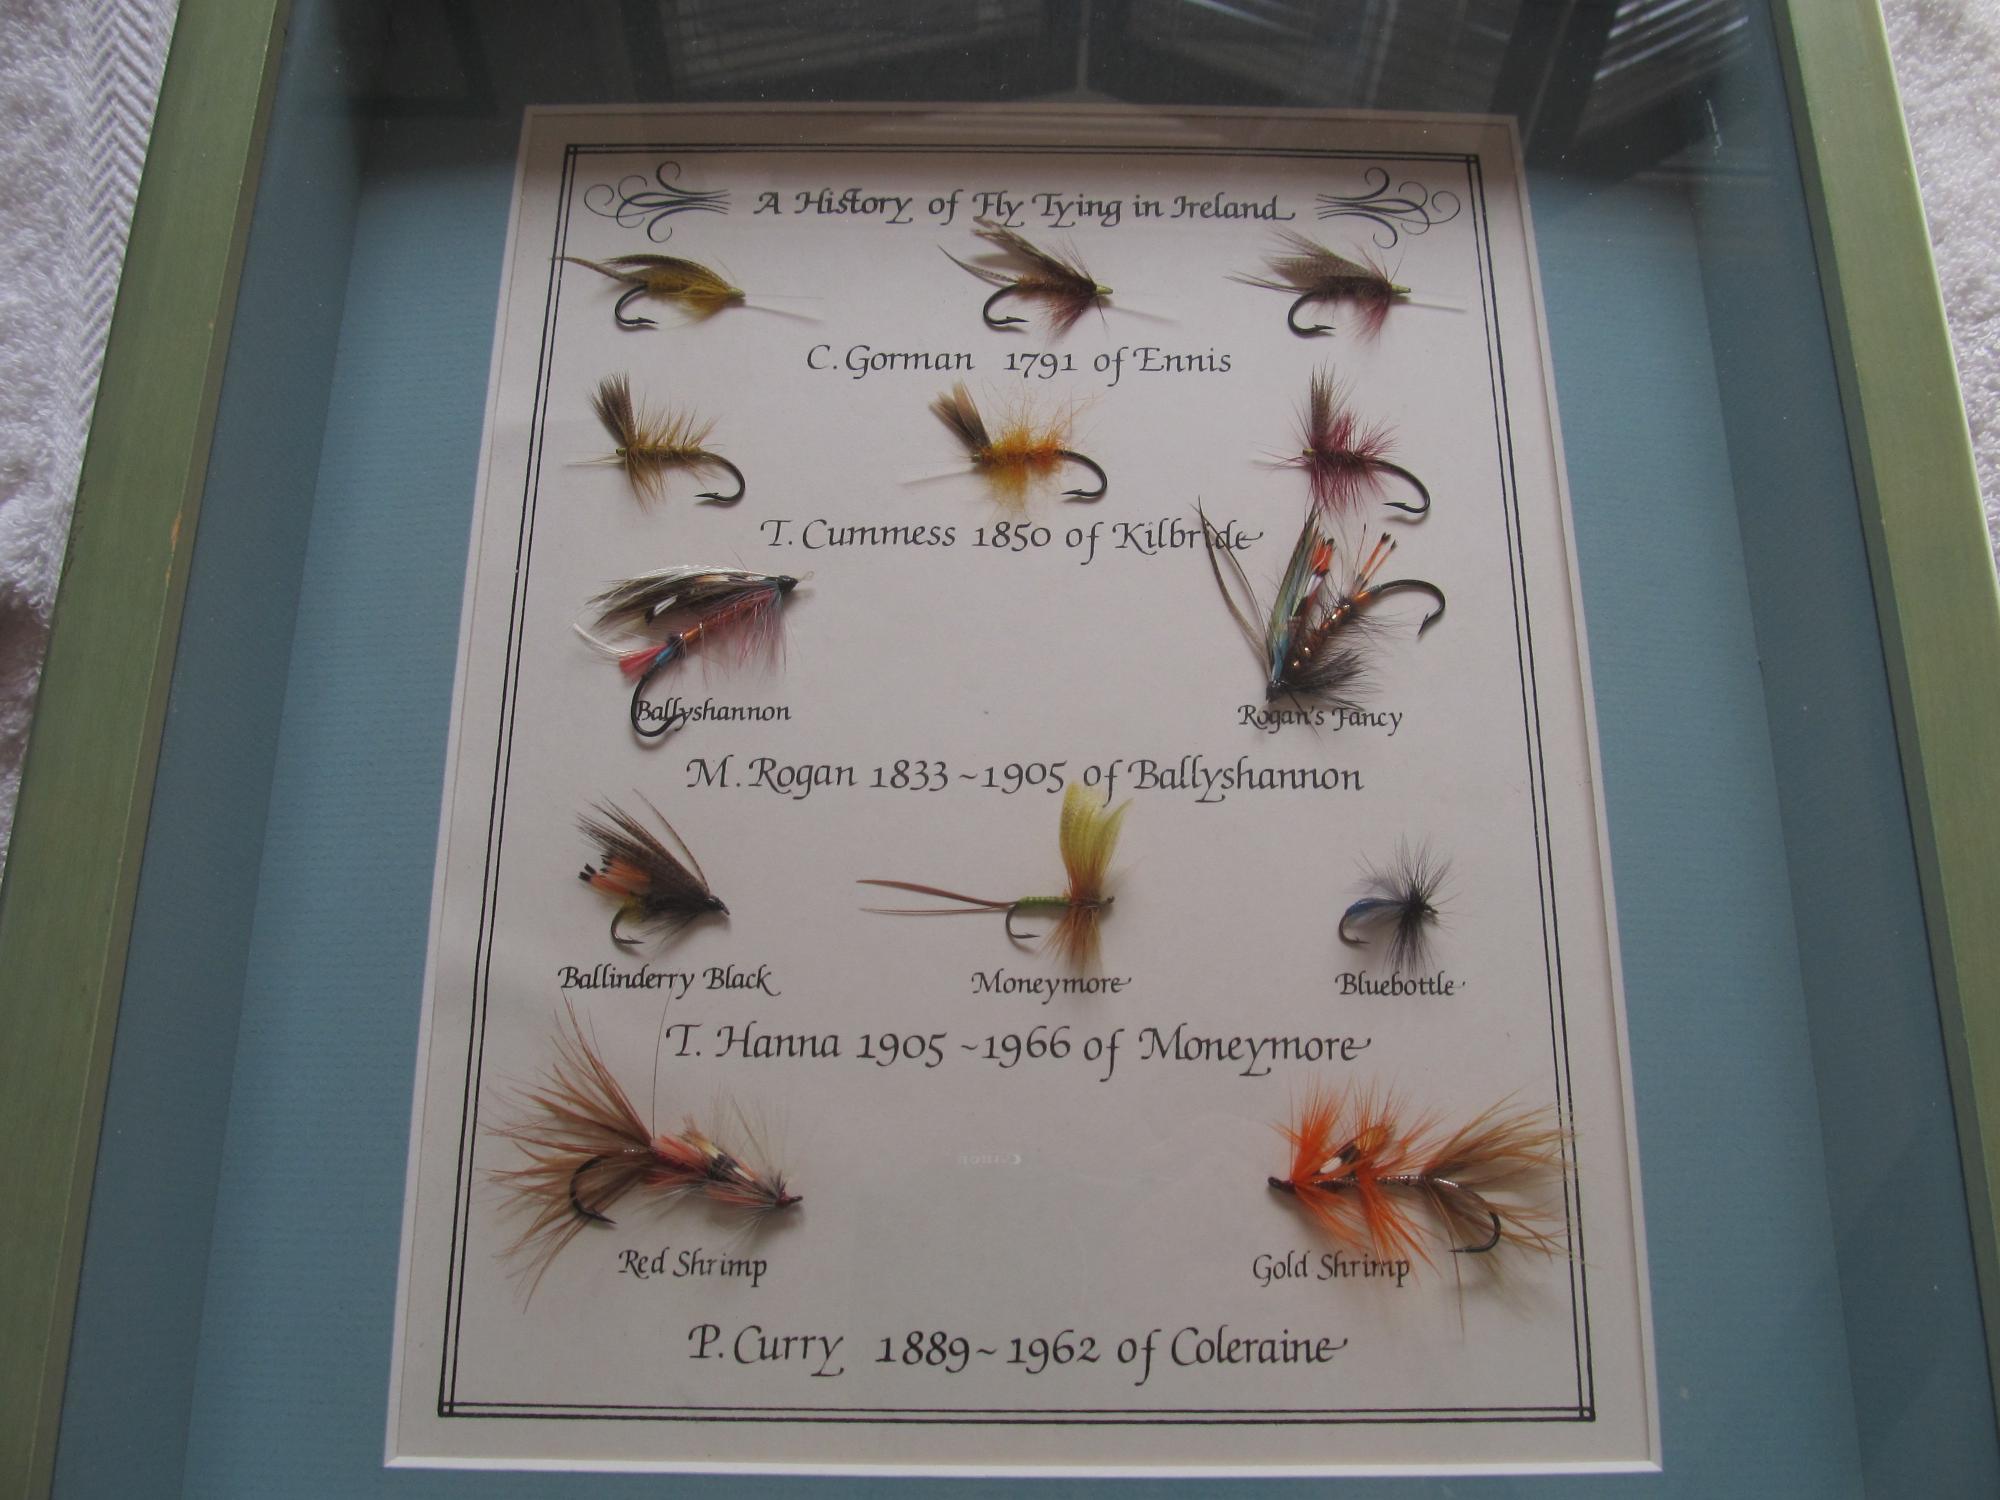 A History of Fly Tying in Ireland. by Robert McHaffie.